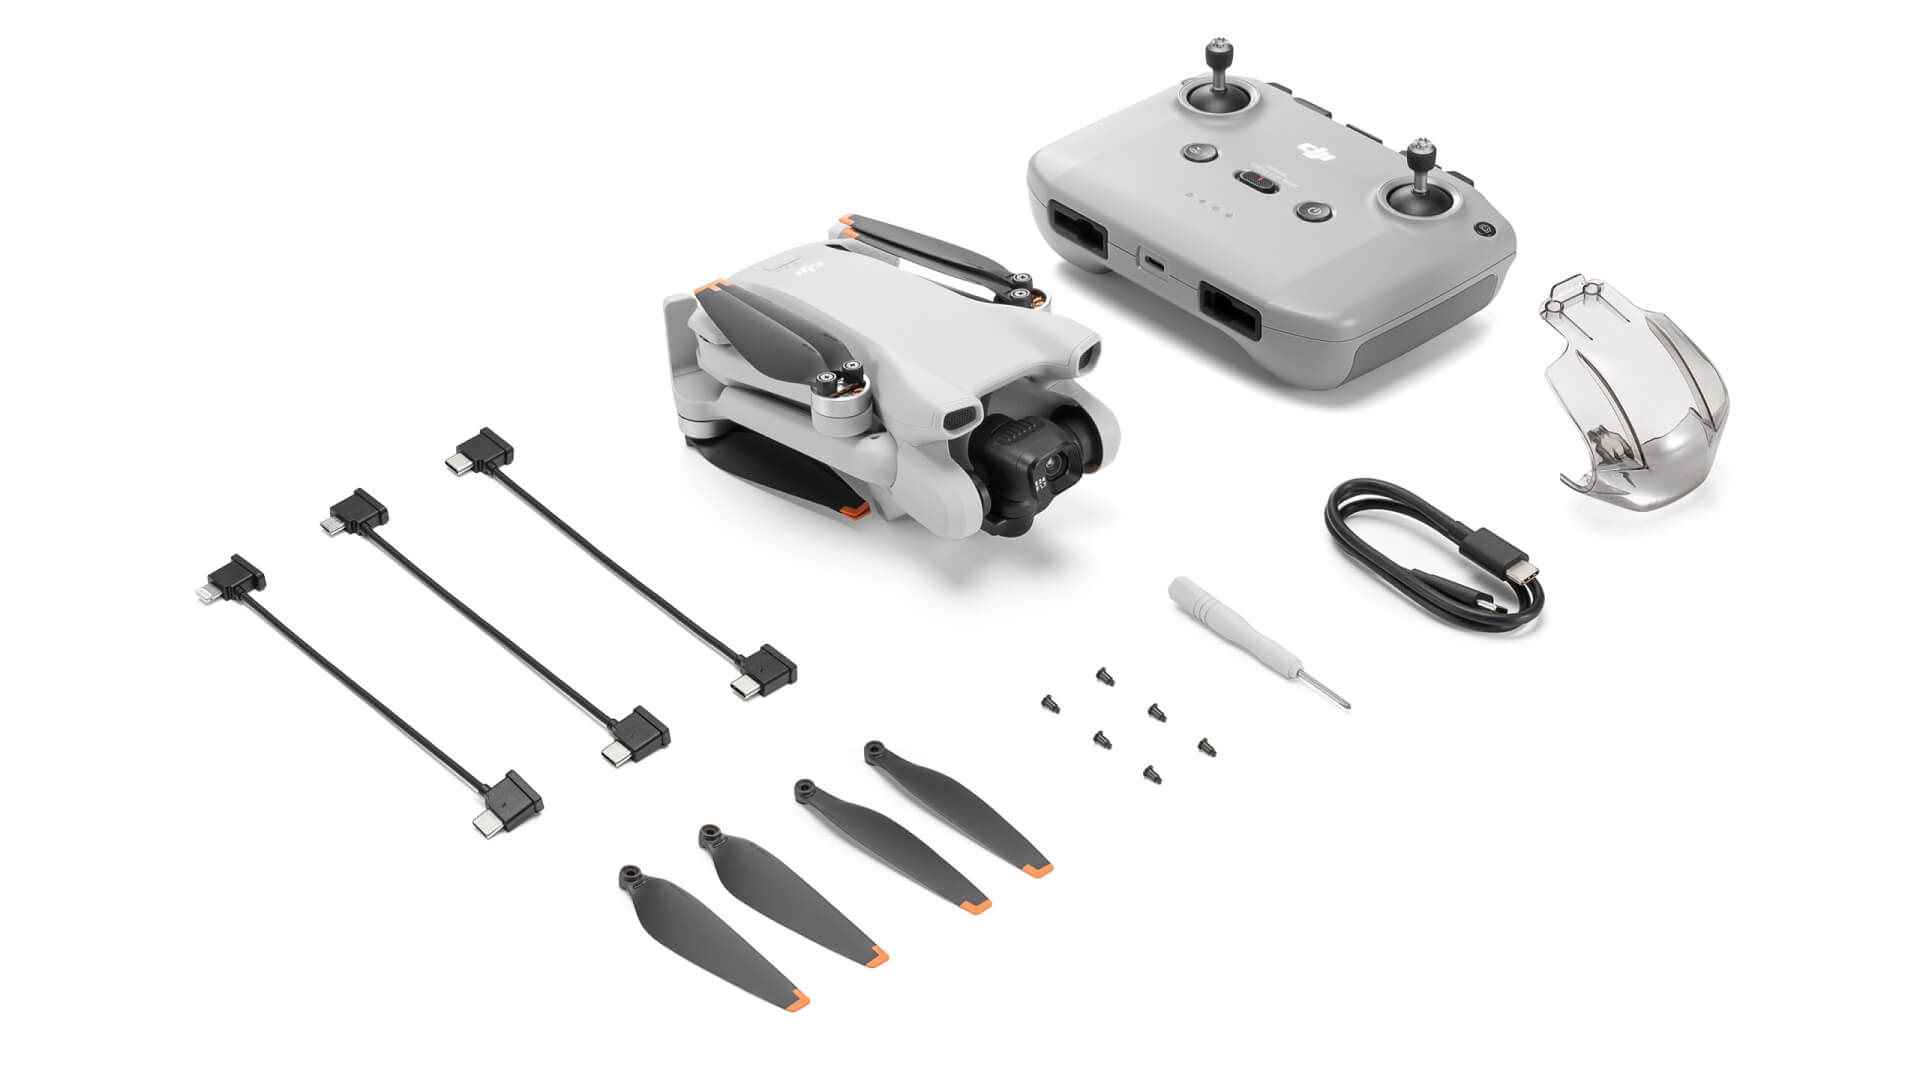 1670701505 551 DJI Mini 3 Introduced Features and price